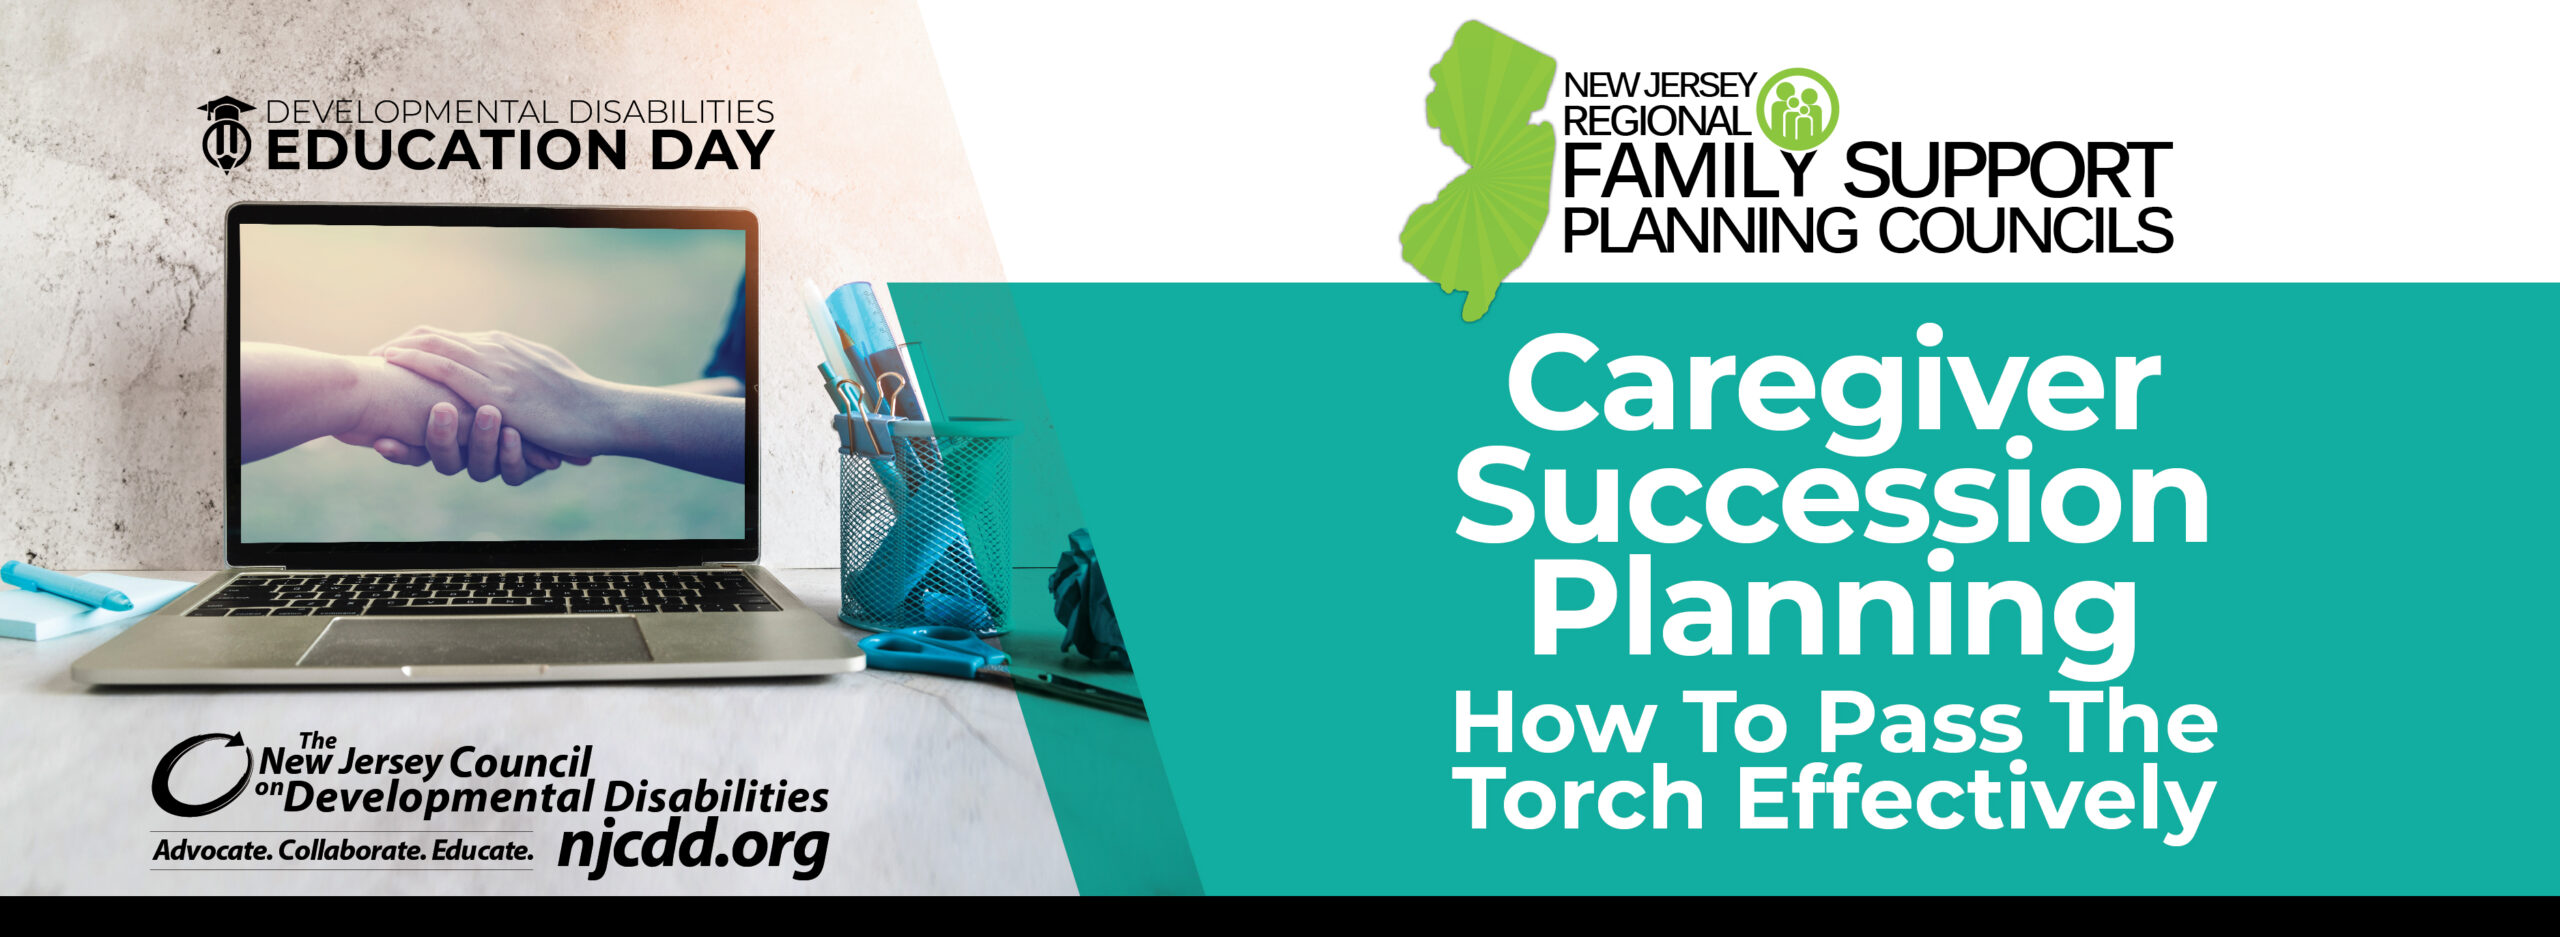 Developmental Disability Education Day How to Pass the Torch Effectively-ResourcesWebBanner